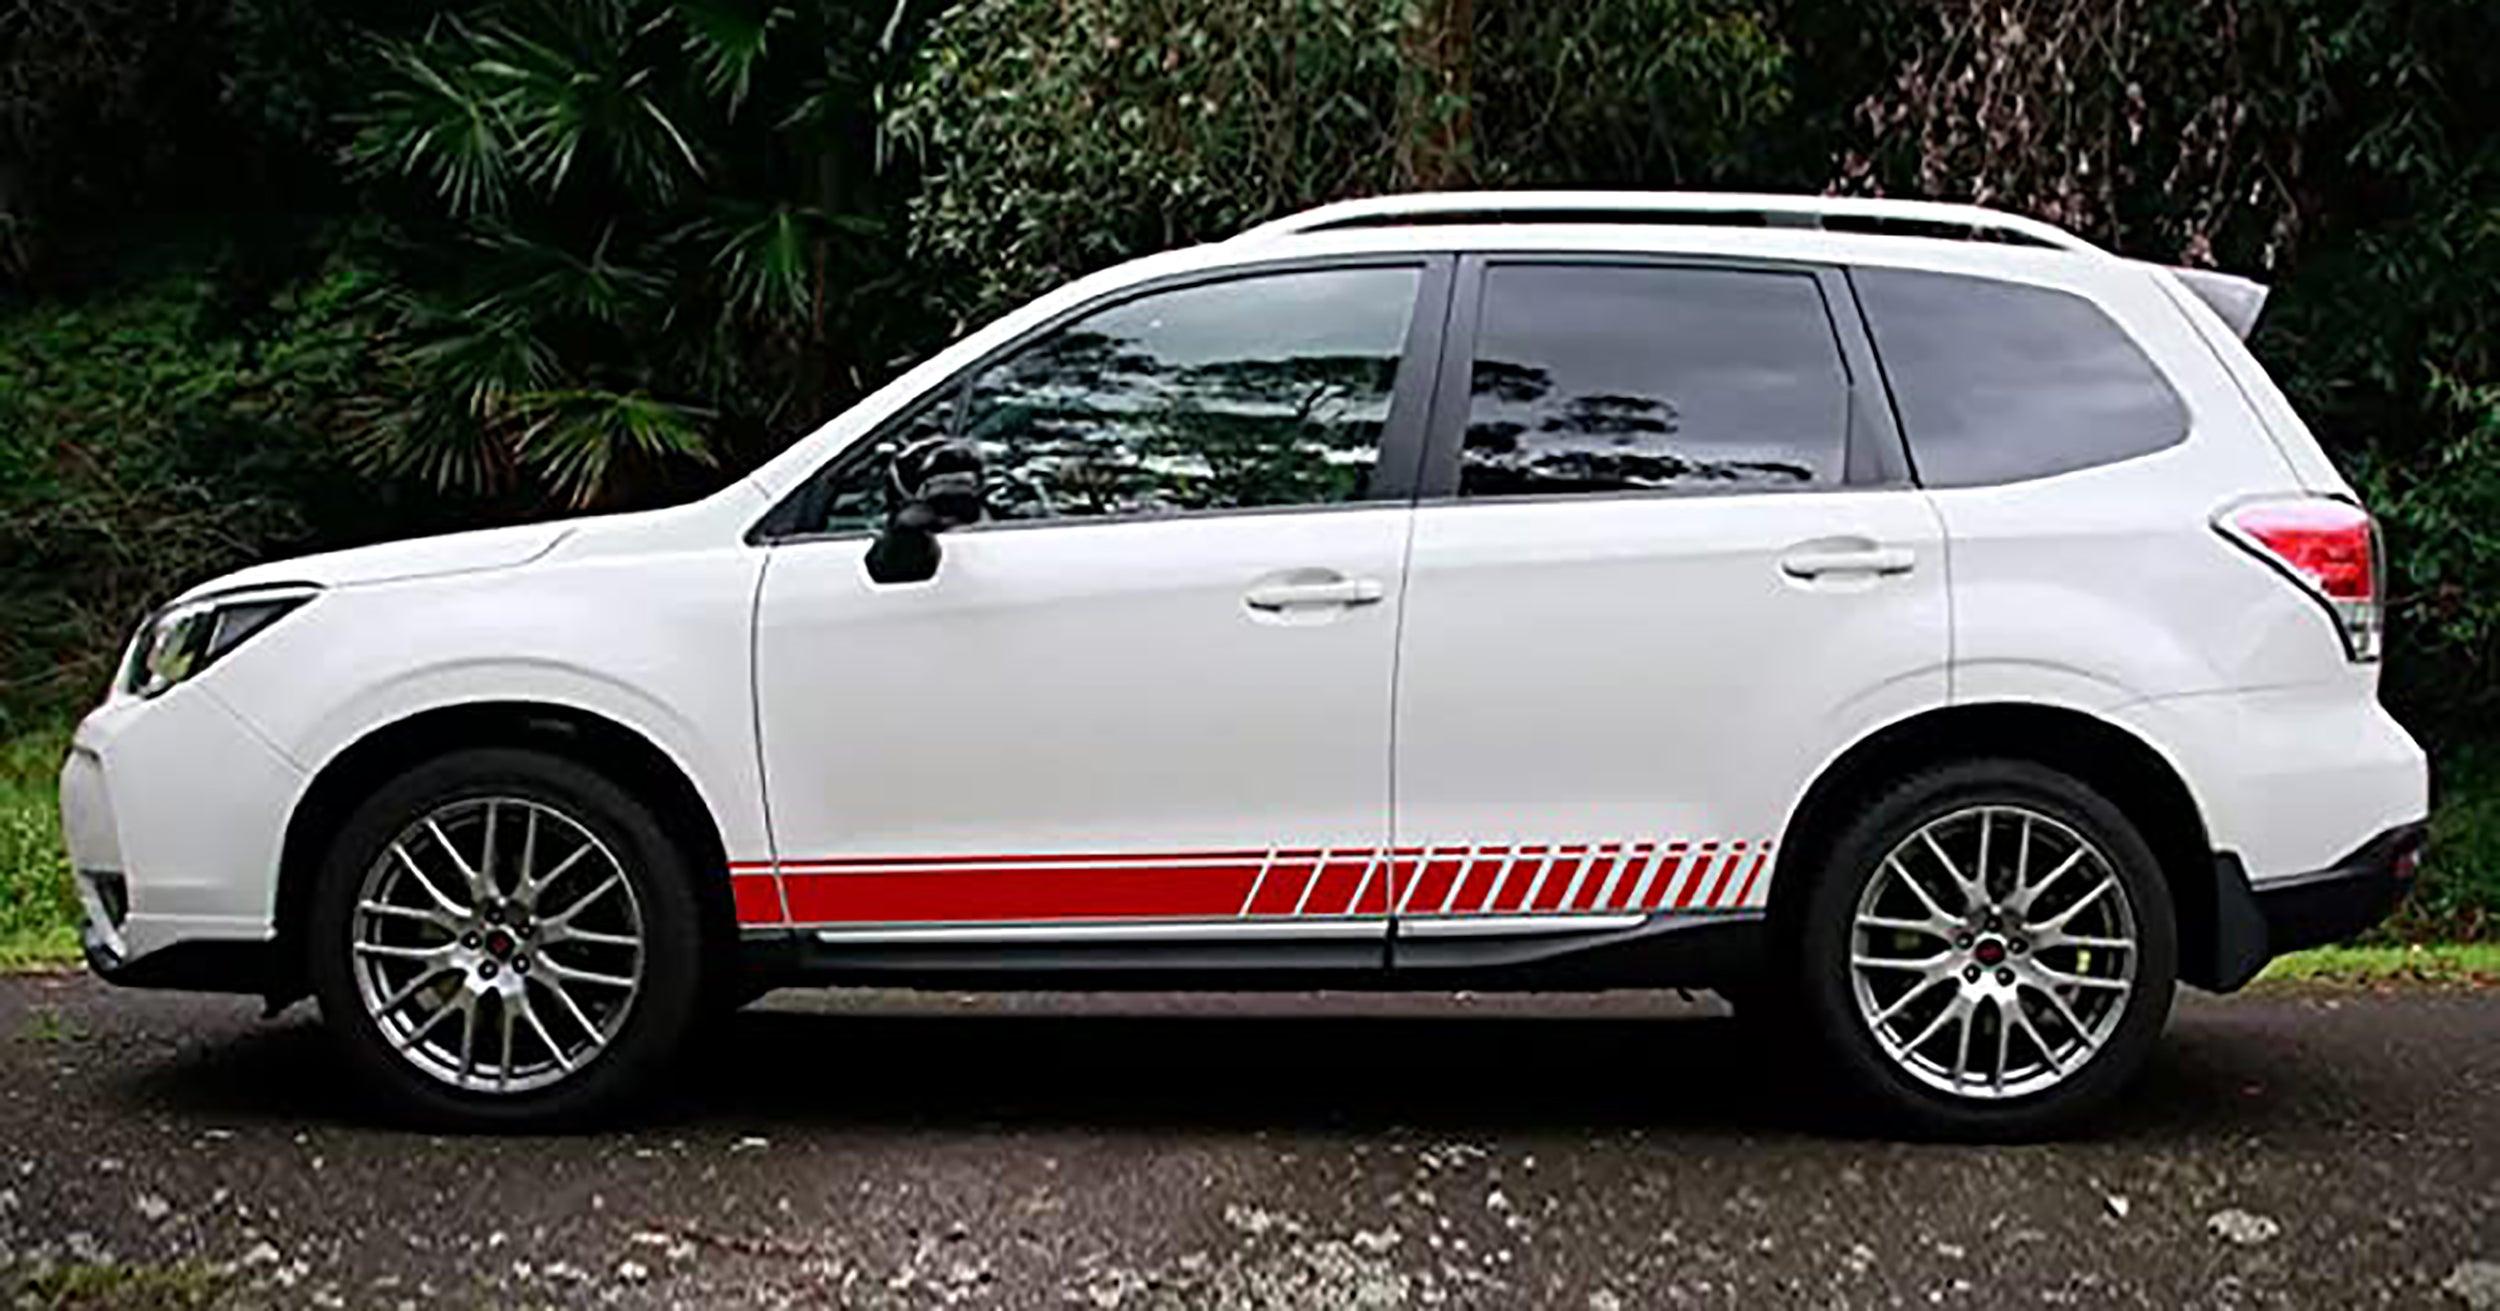 Subaru Forester (2012 to 2016) Custom Vinyl Decals, Graphics and Stickers - Side Racing Strips Kit - Jkprostickers